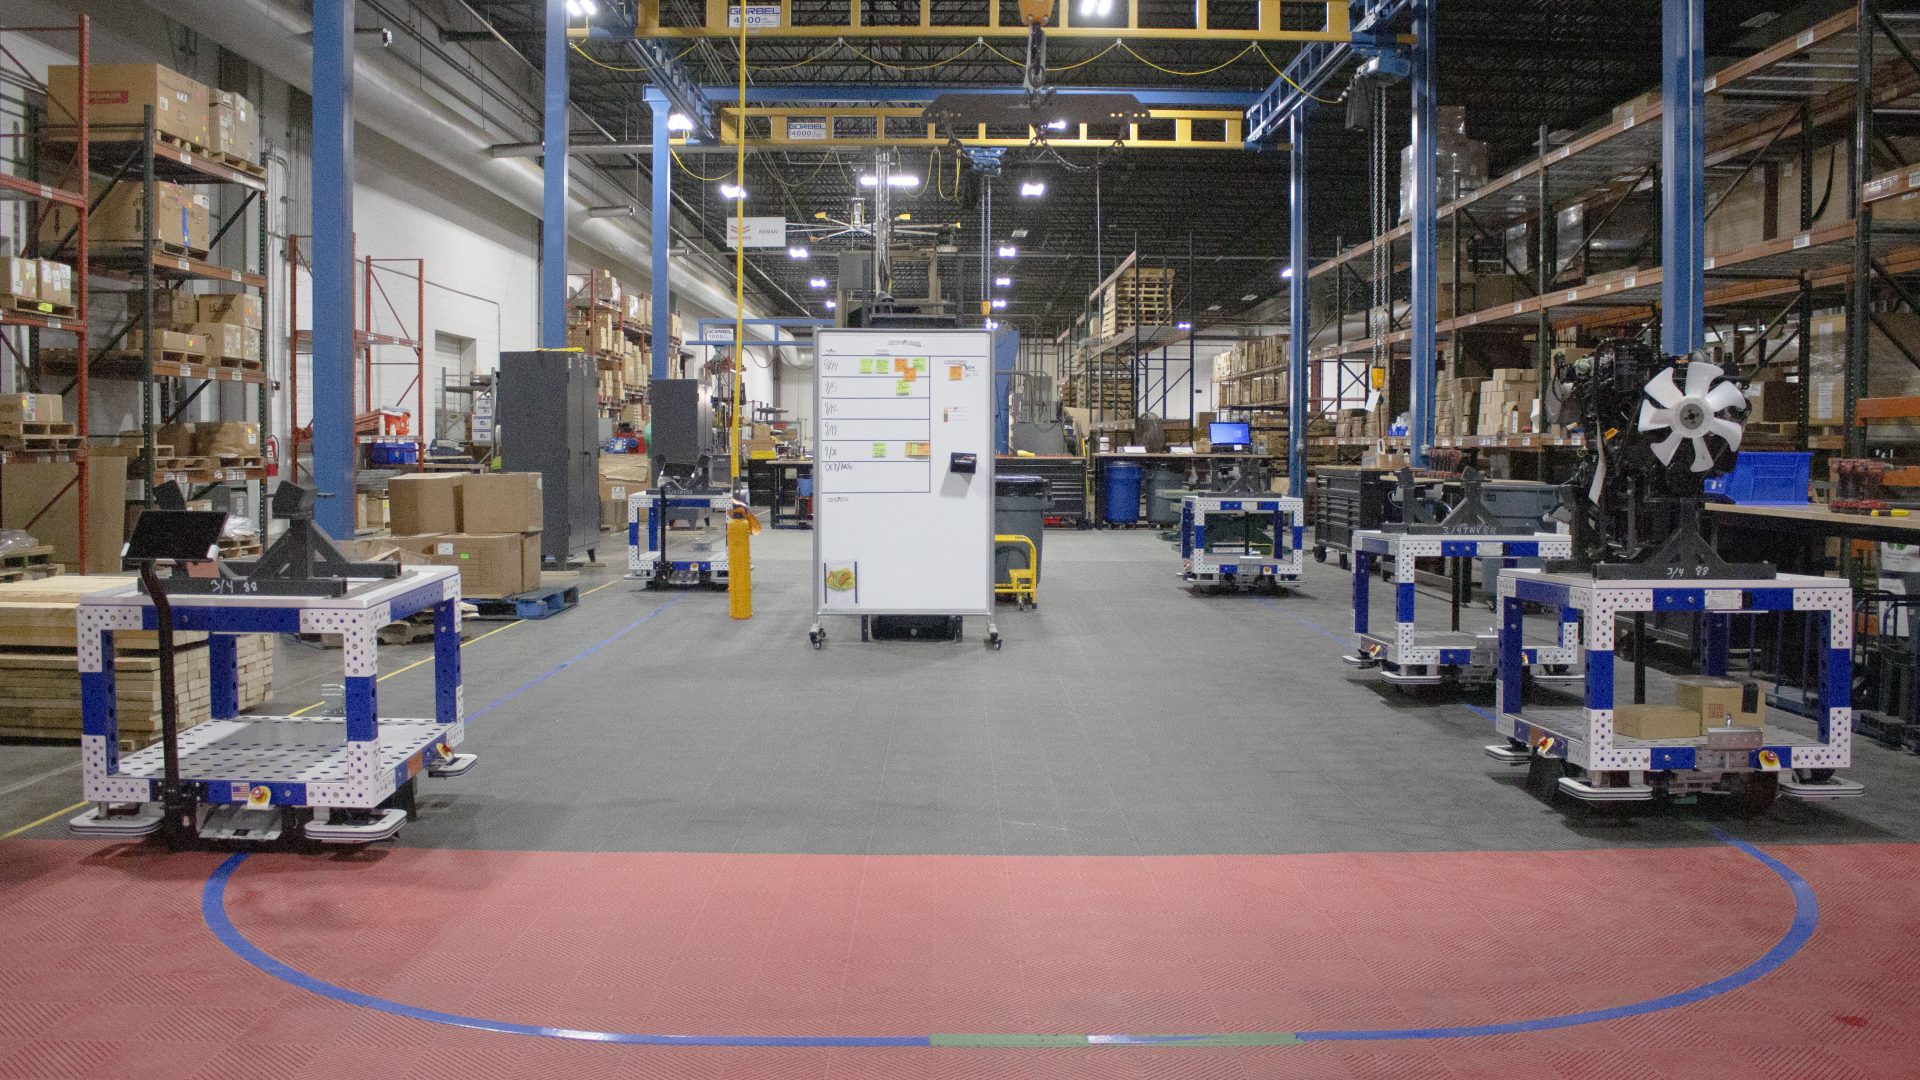 Yanmar America Corporation's advanced automated guided vehicle